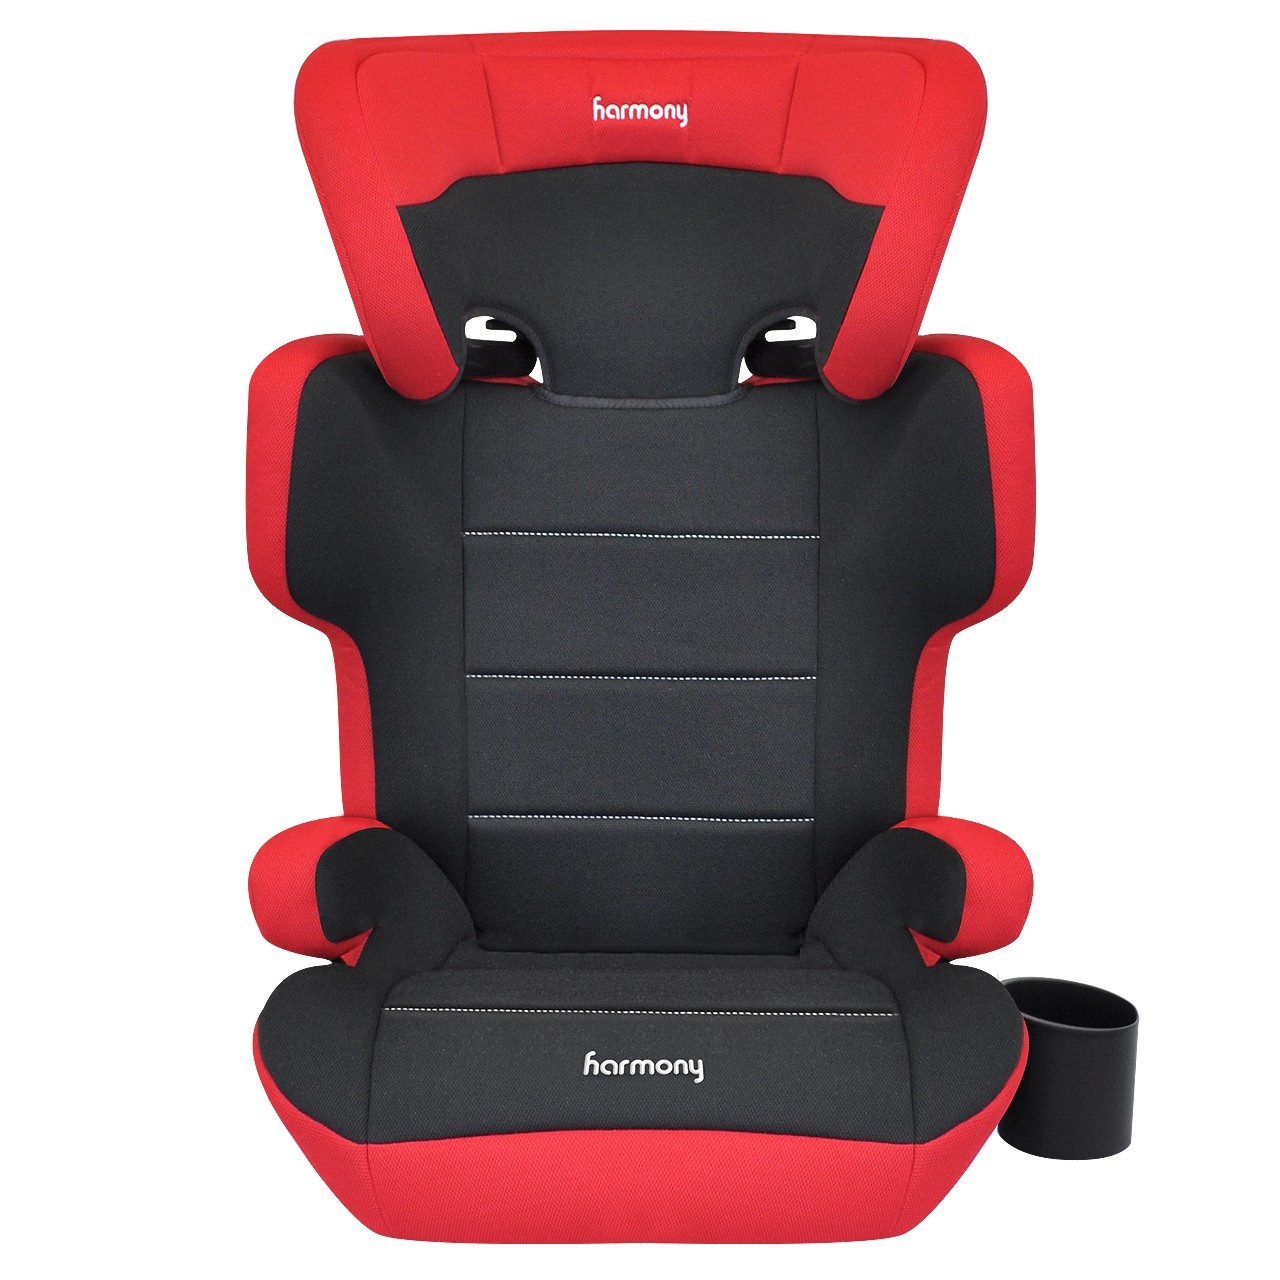 Dreamtime Elite Comfort Booster Car Seat - Red and Black